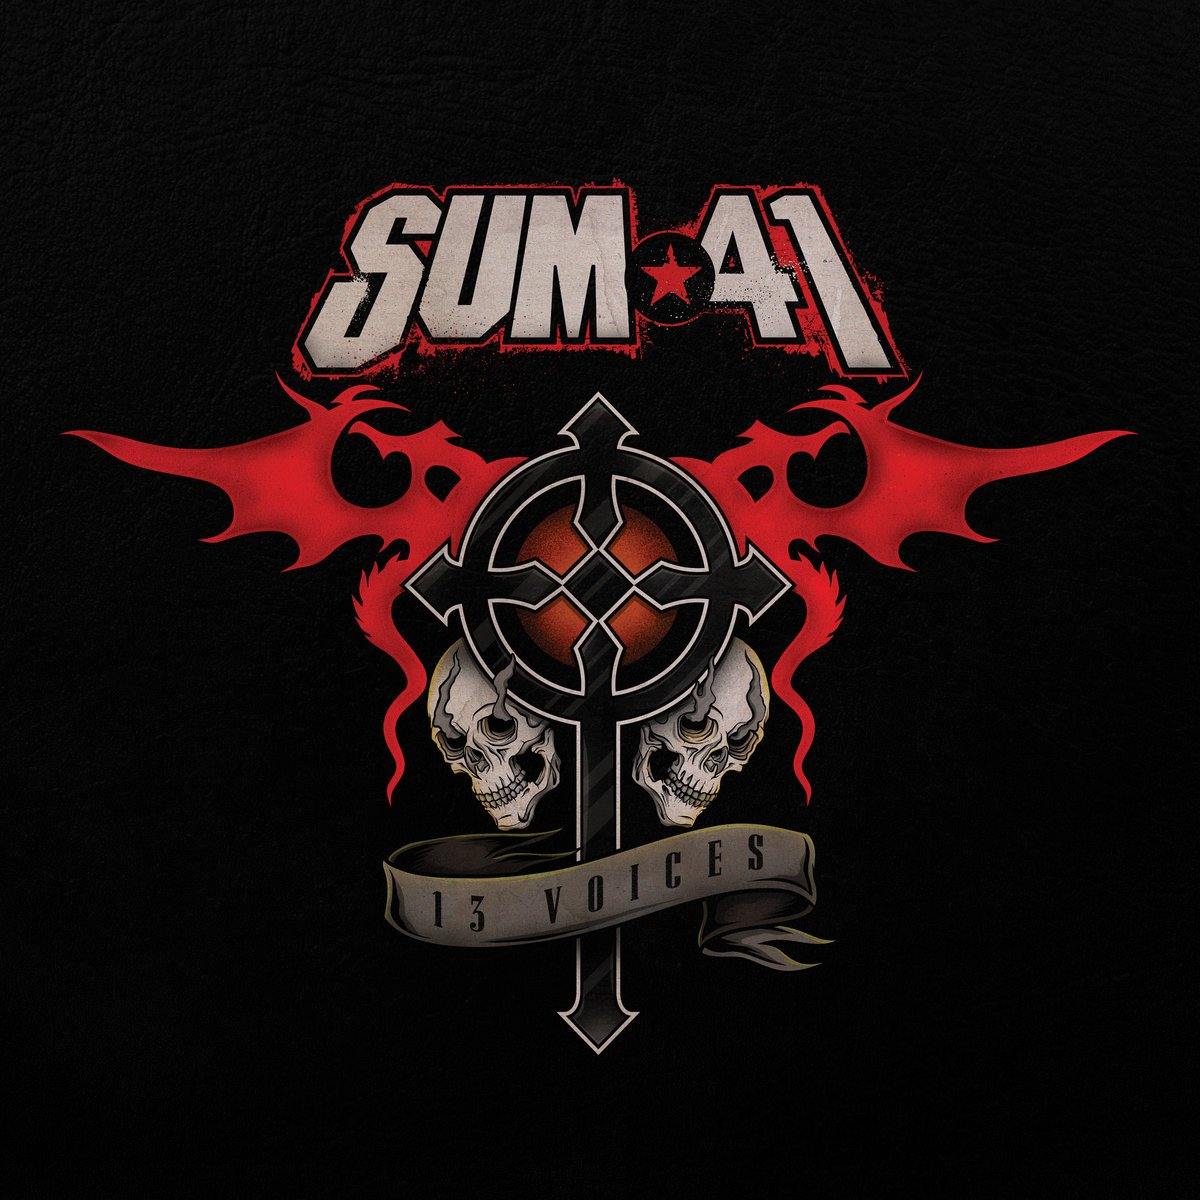 Buy – Sum 41 "13 Voices" 12" – Band & Music Merch – Cold Cuts Merch